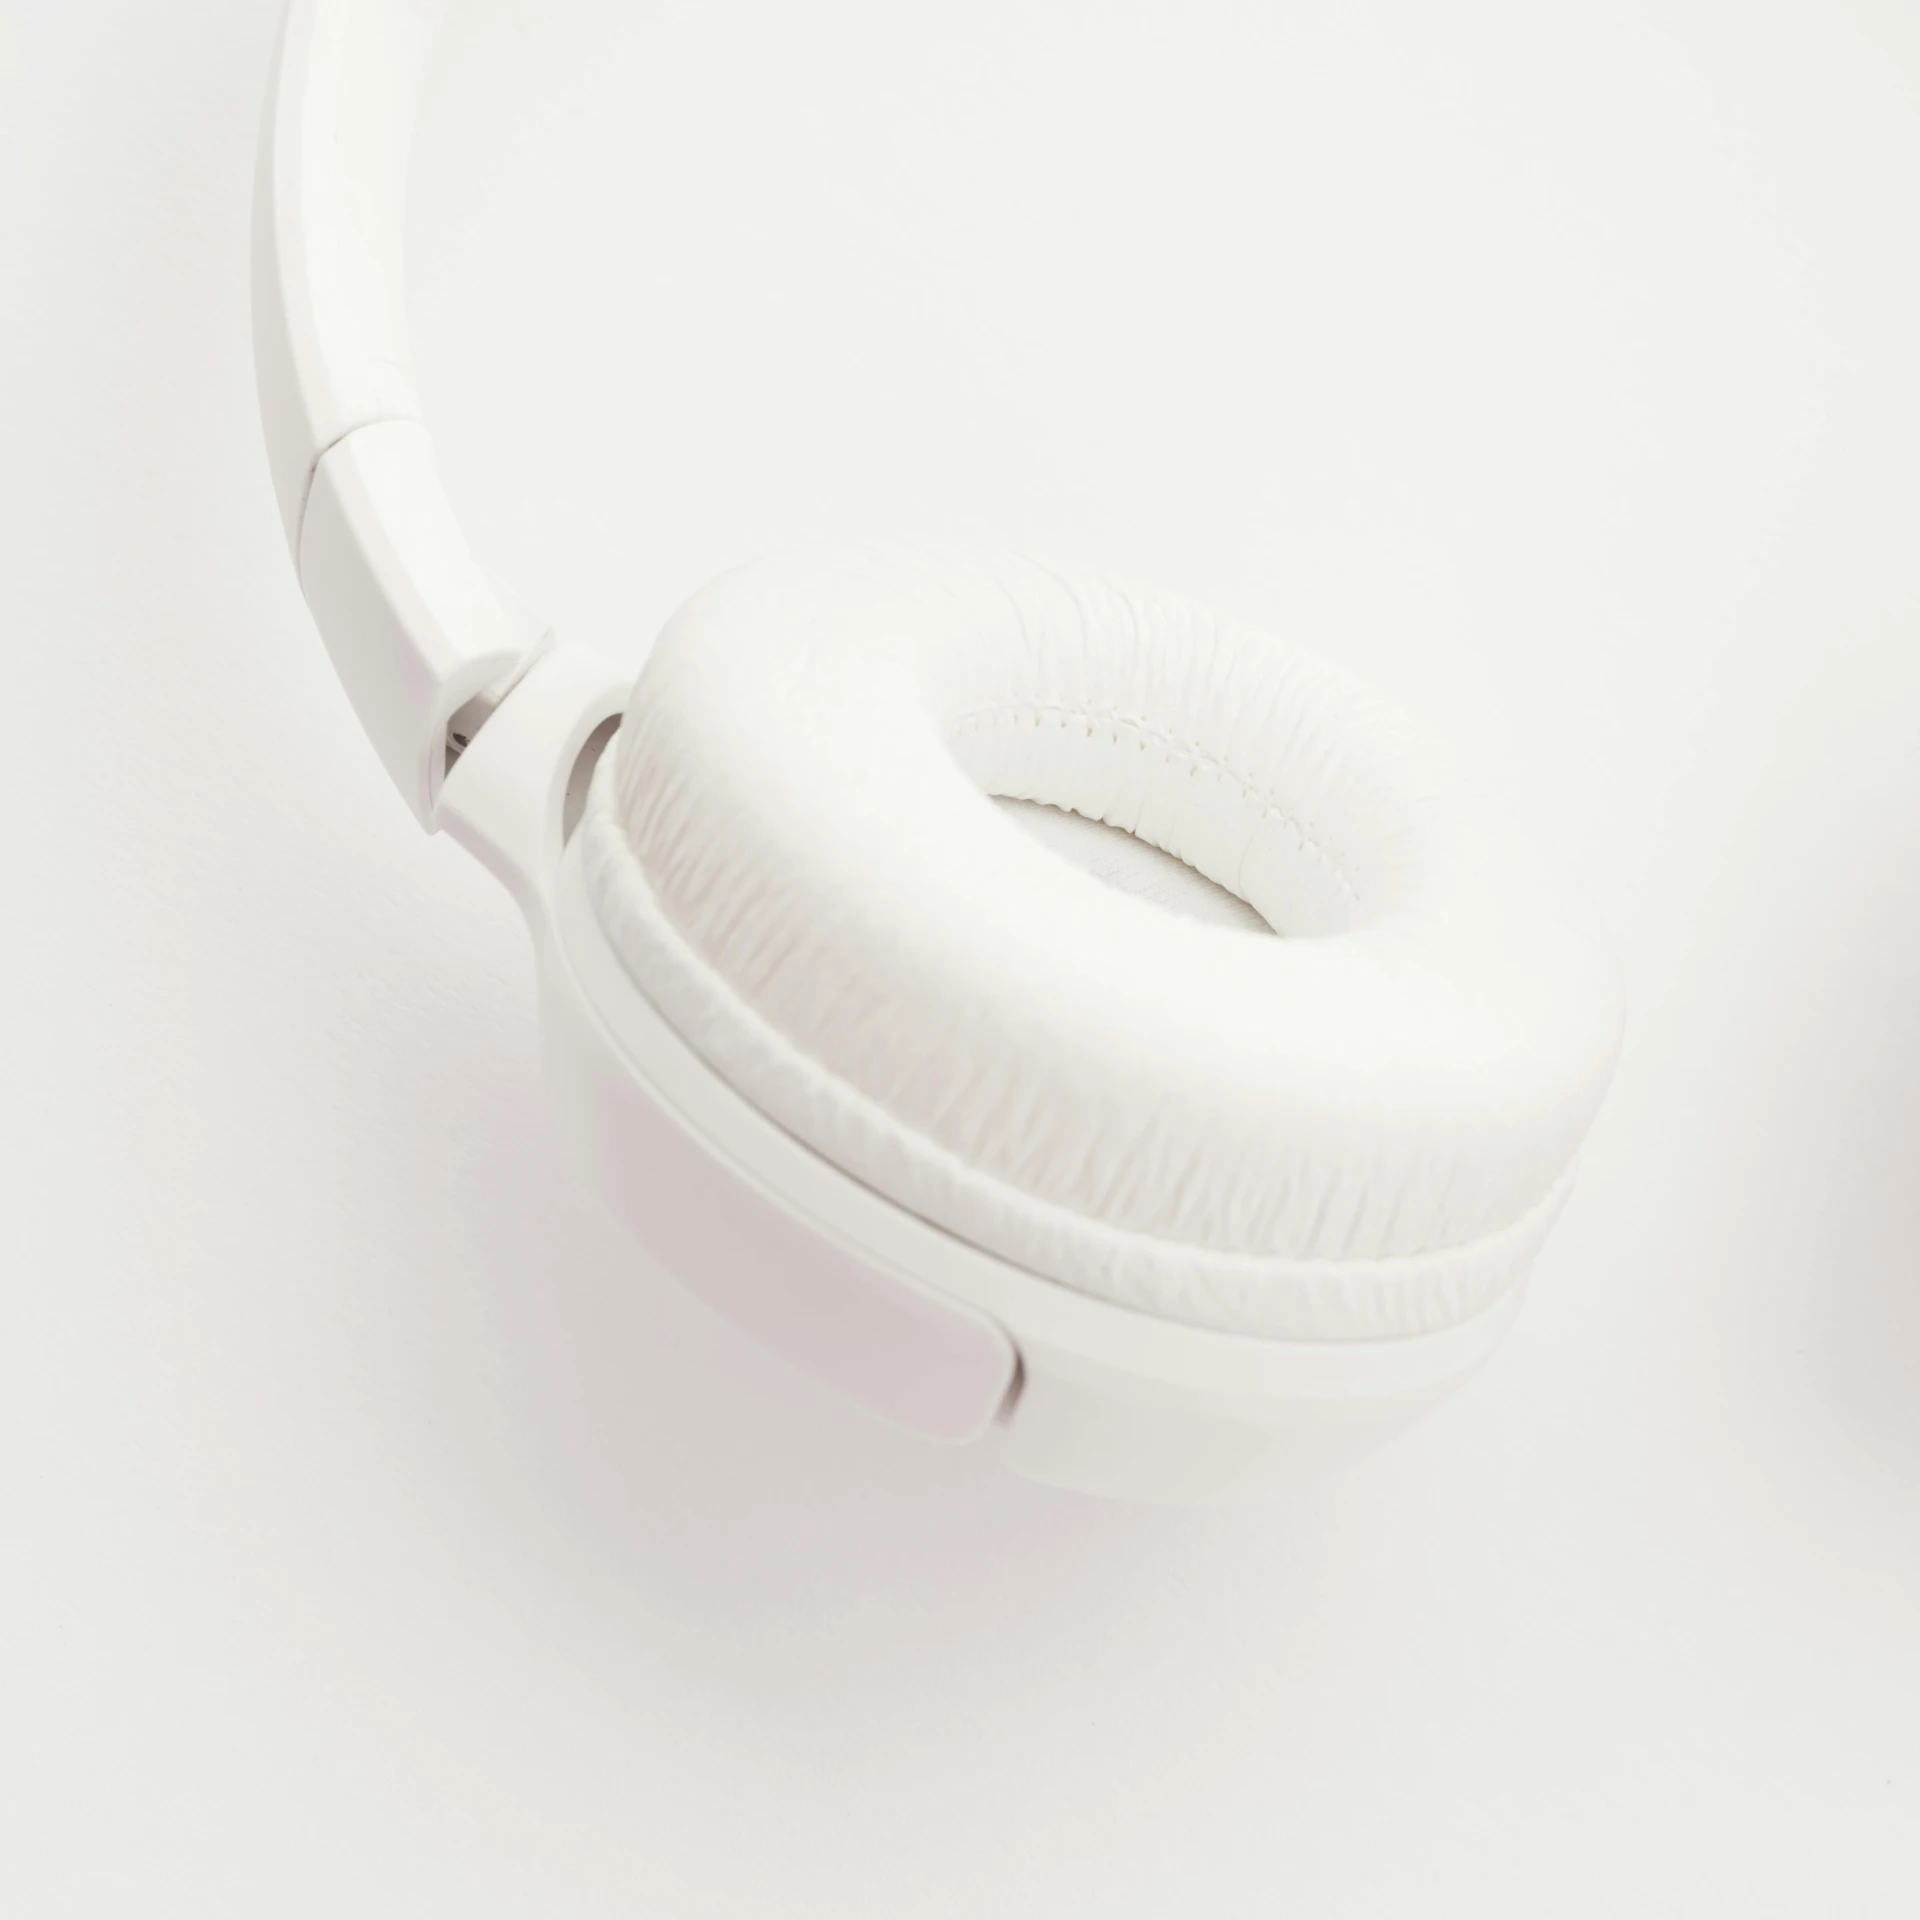 a pair of white headphones on a white surface, by Adam Marczyński, hurufiyya, multiple stories, high quality image, soft white rubber, bubbly